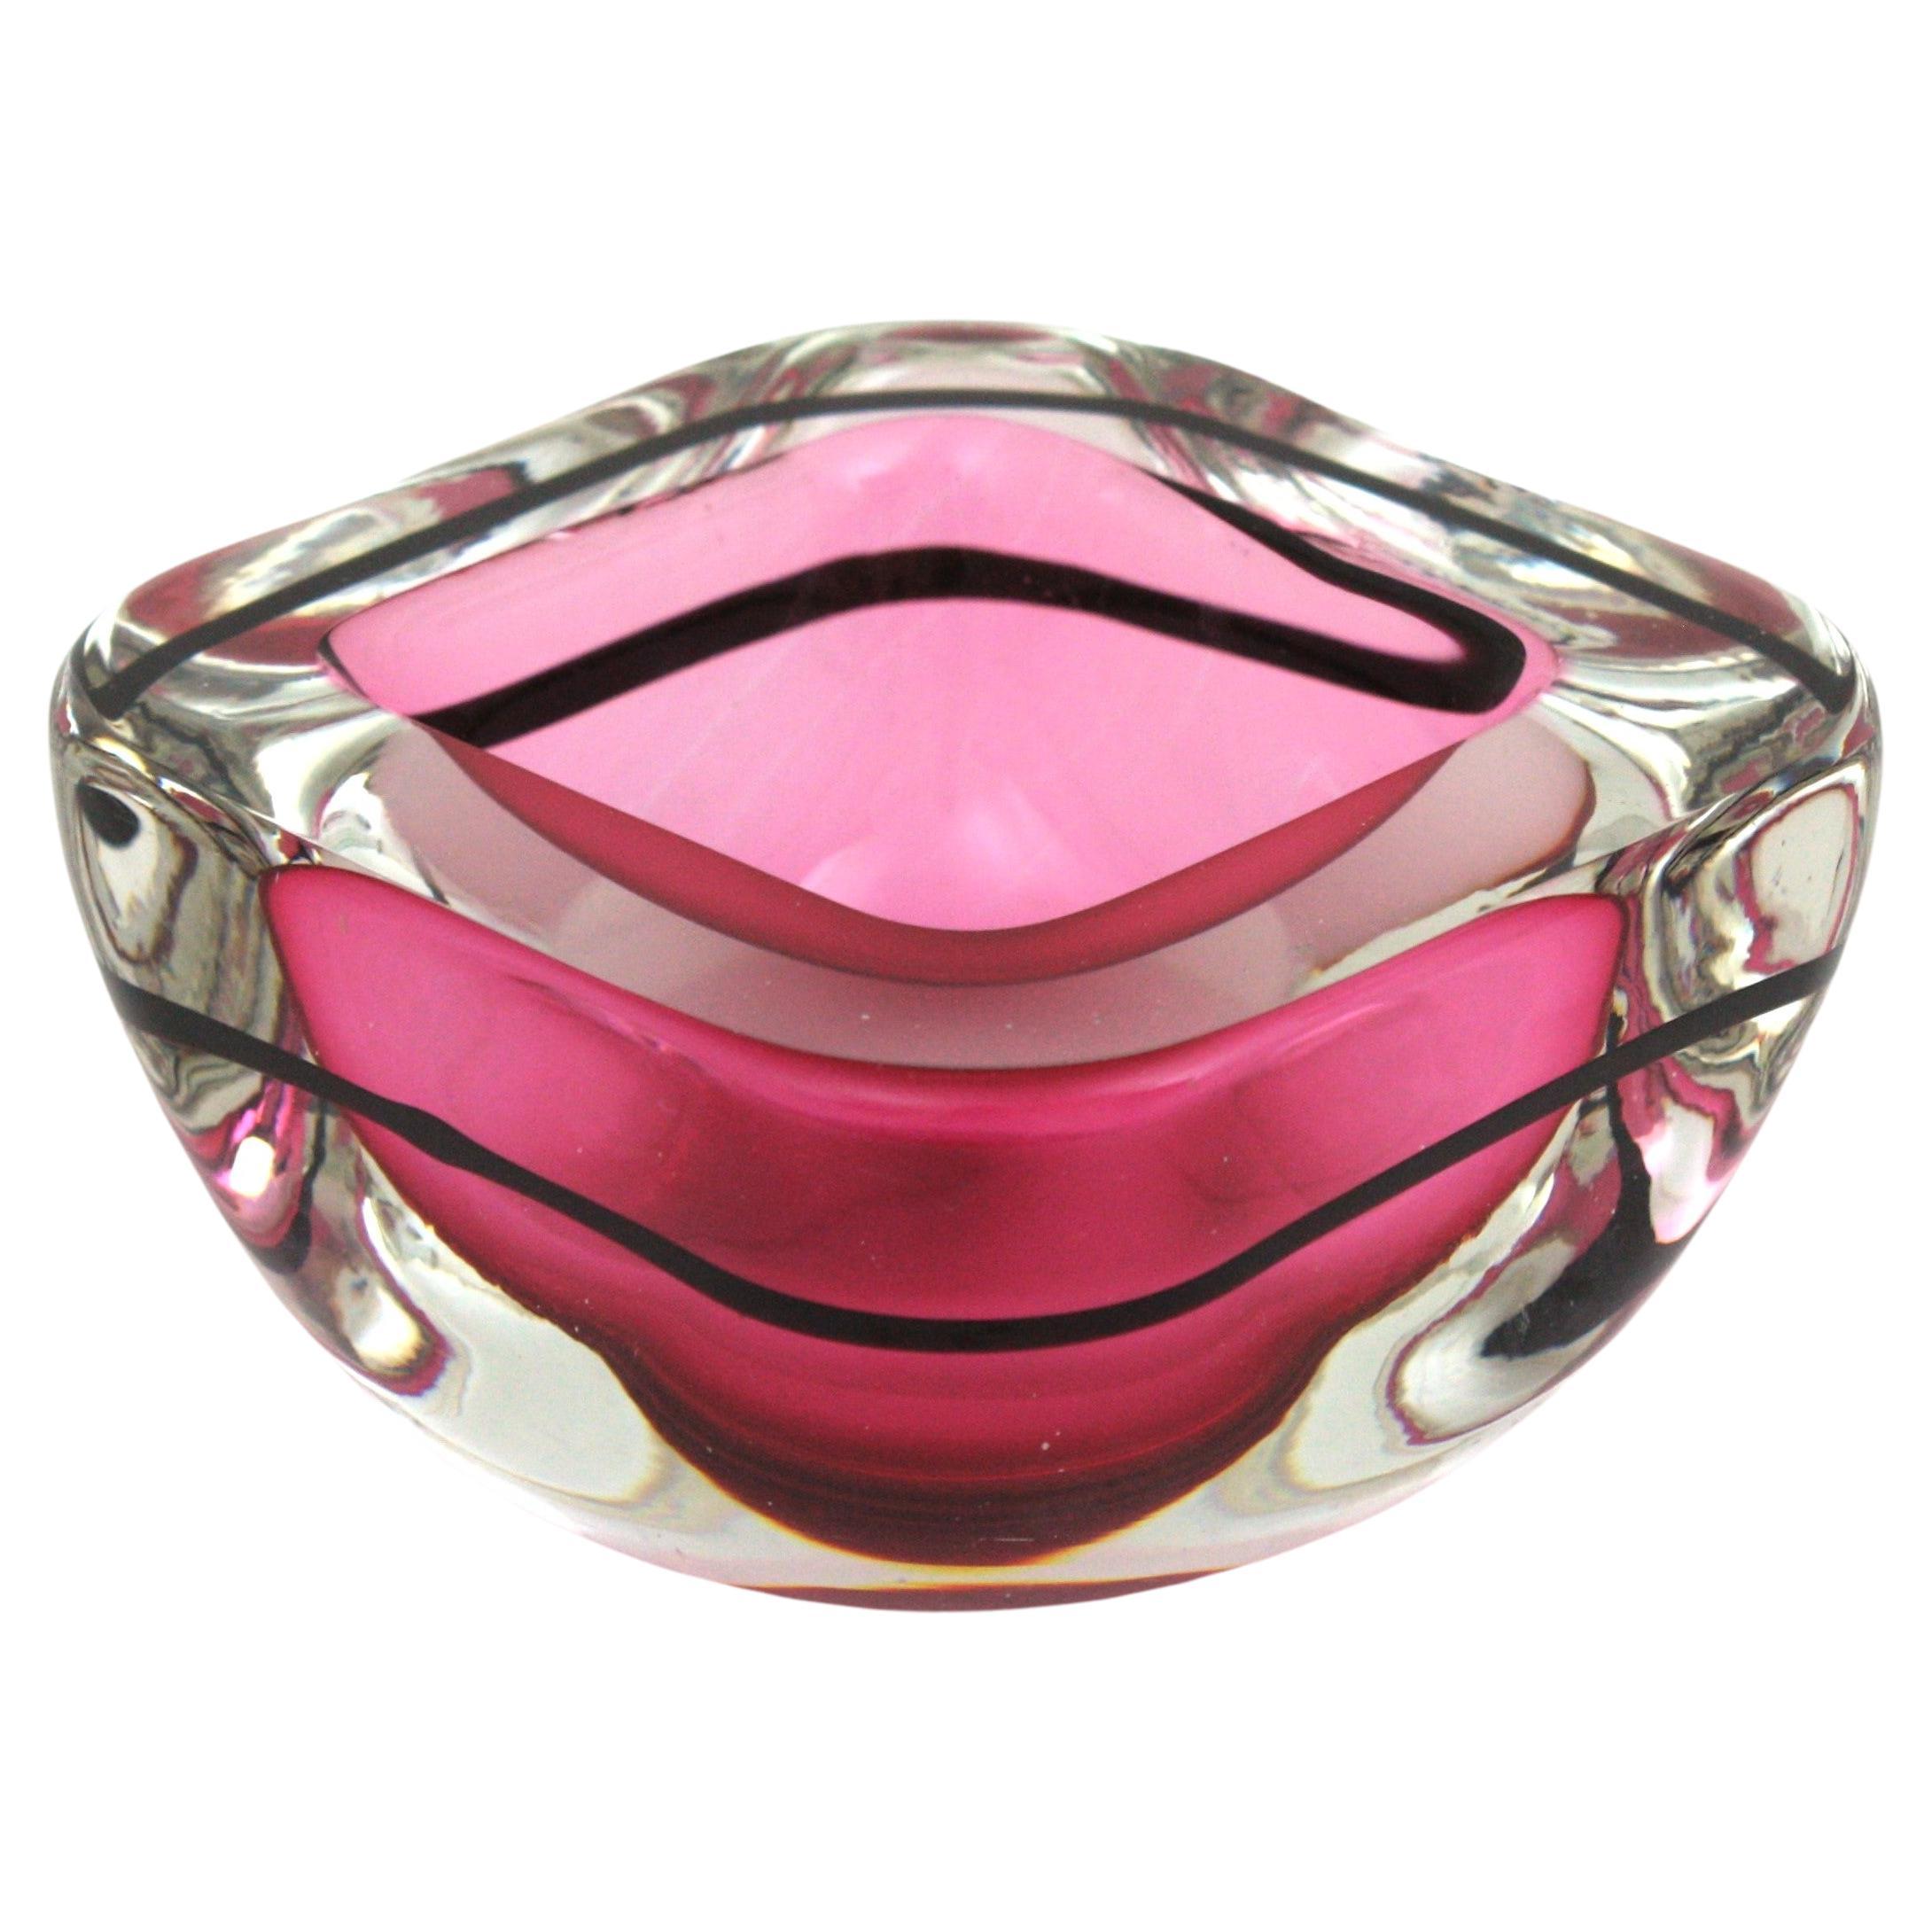 Archimede Seguso Murano Sommerso Pink Black Geode Art Glass Bowl For Sale